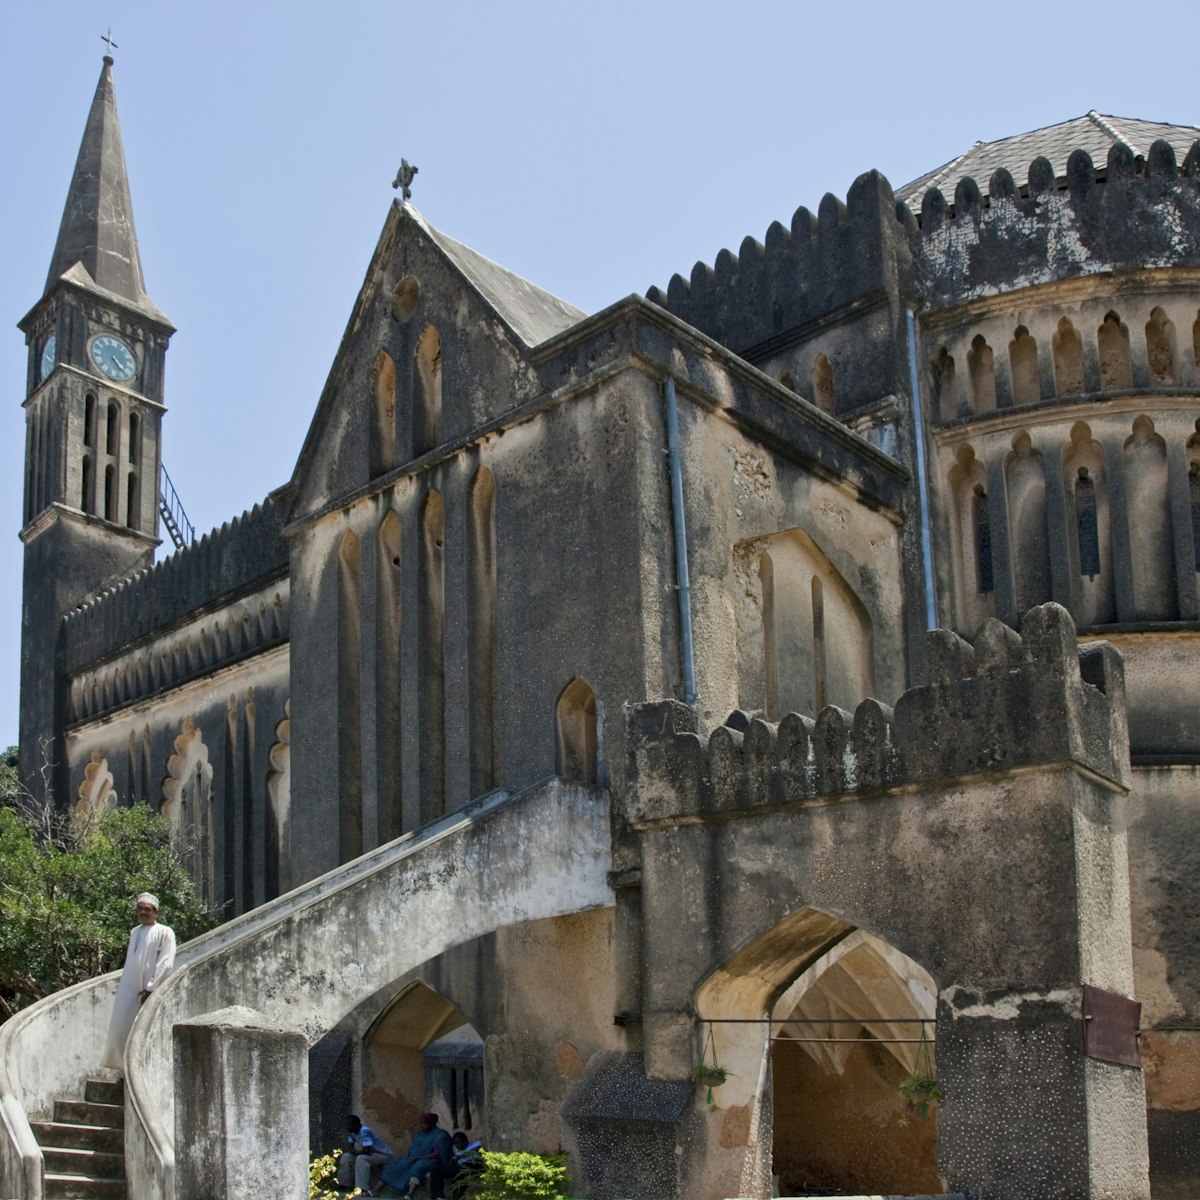 Tanzania, Zanzibar, Stone Town. The Anglican Cathedral Church of Christ had its foundation stone laid on Christmas Day 1873